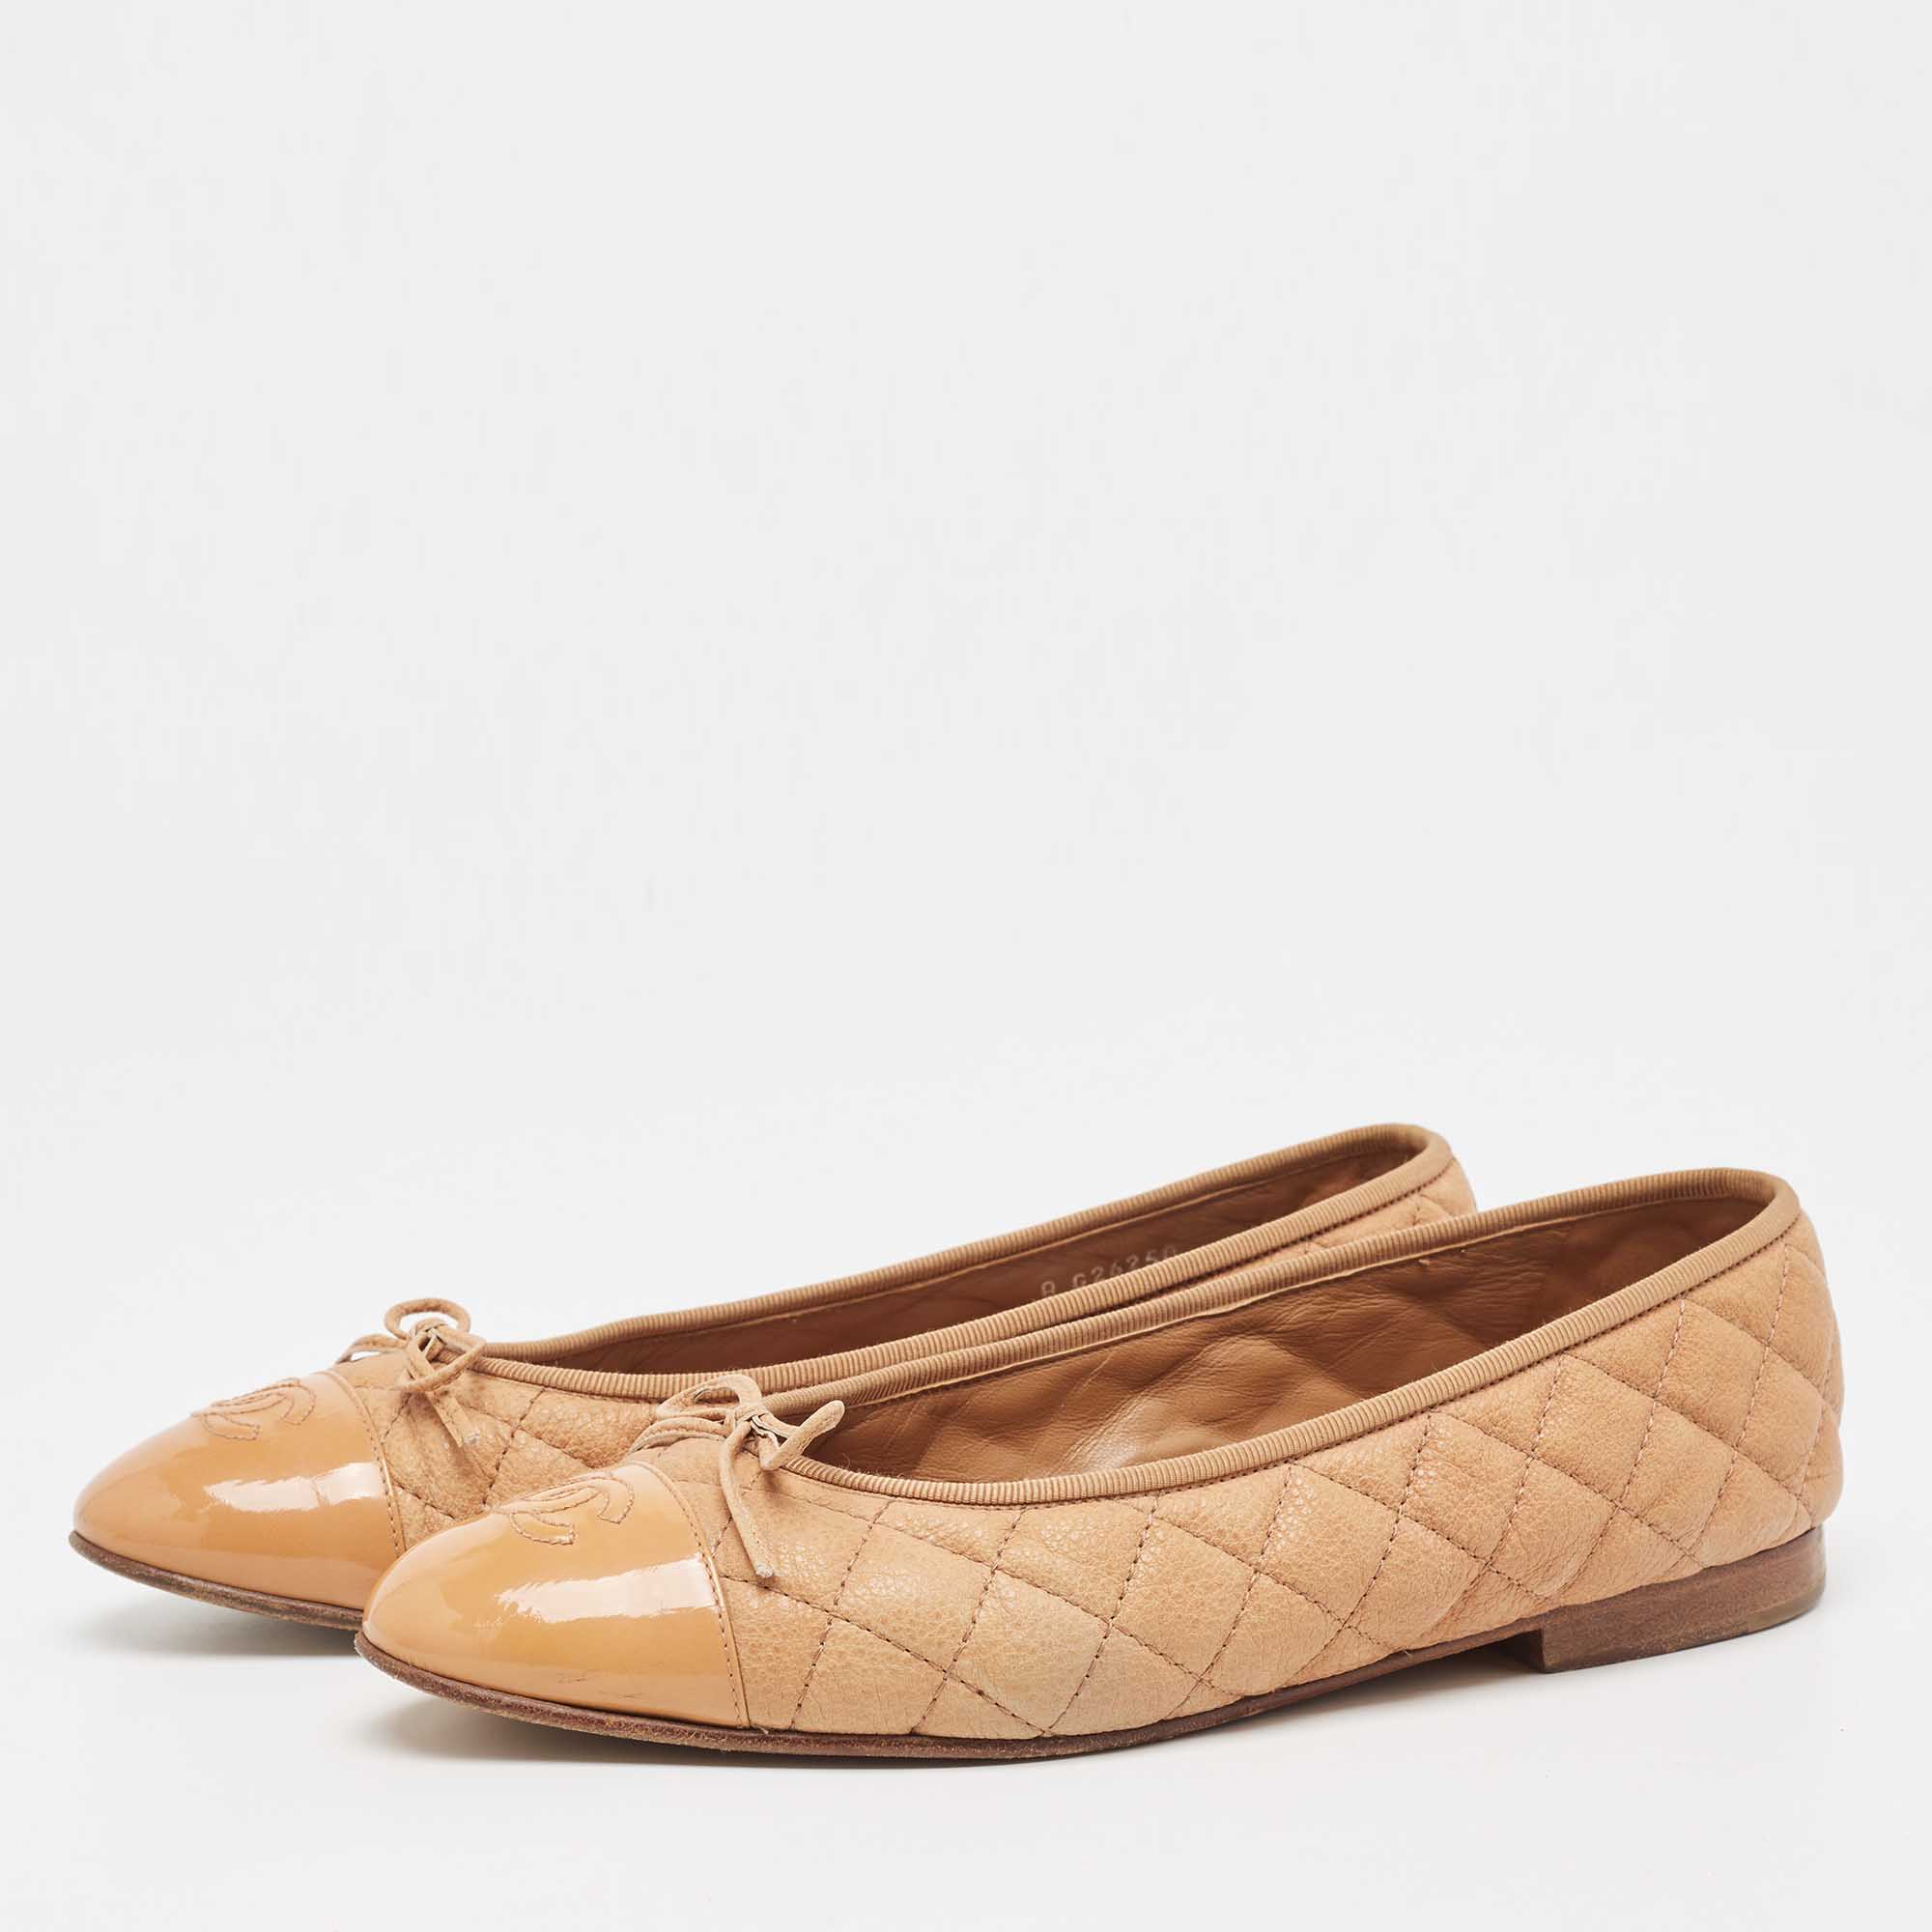 

Chanel Tan Quilted Textured Leather and Patent CC Cap Toe Bow Ballet Flats Size